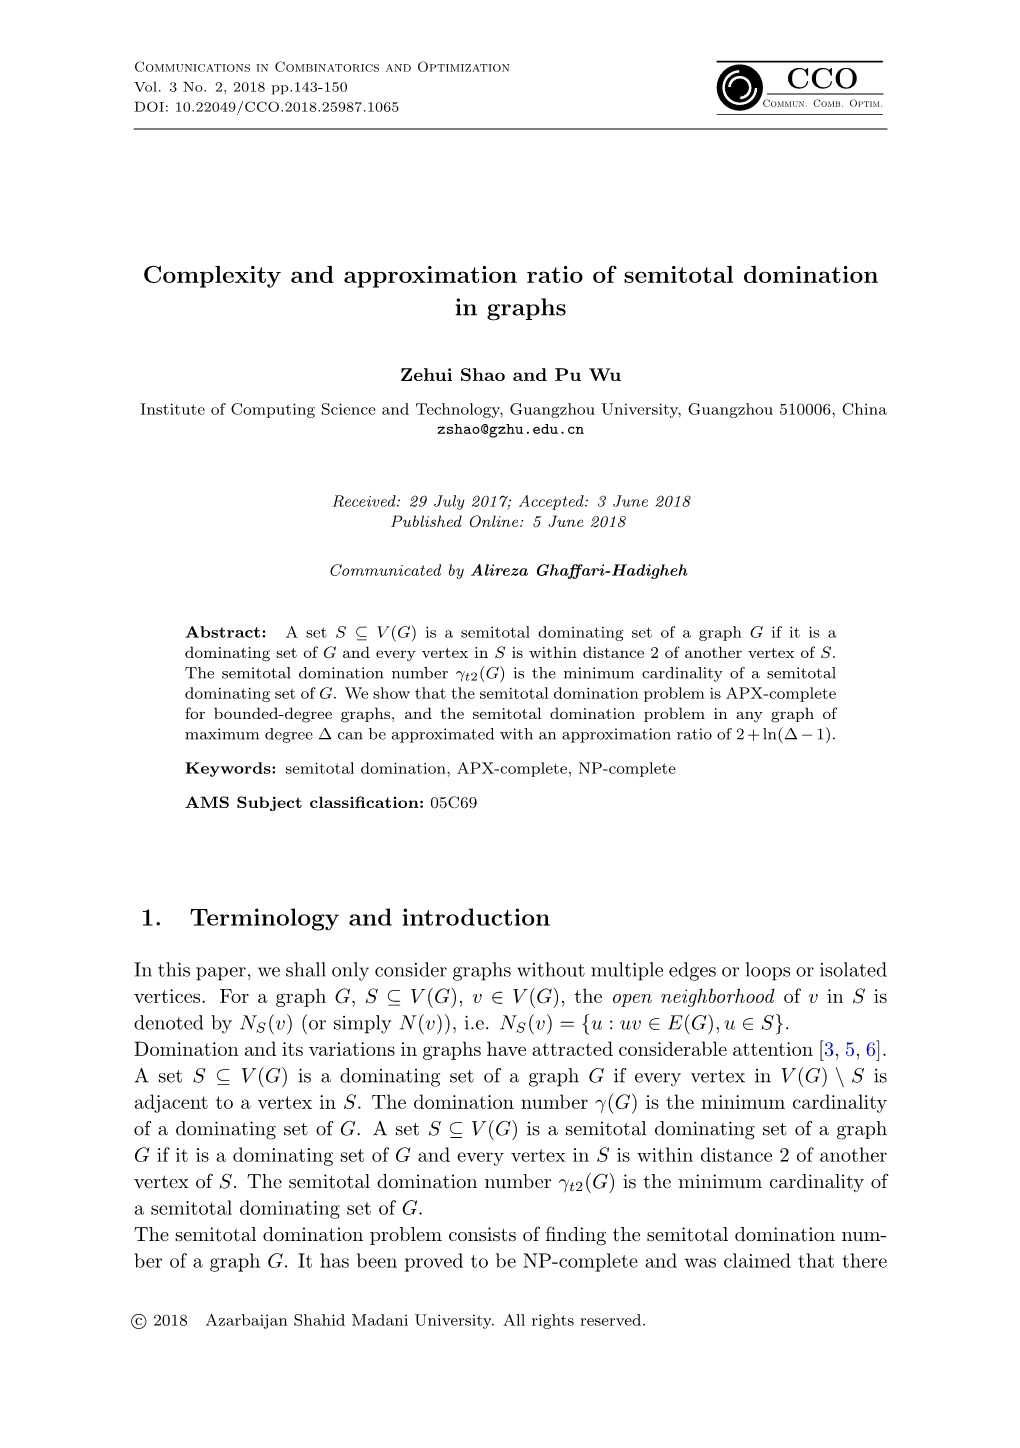 Complexity and Approximation Ratio of Semitotal Domination in Graphs 1